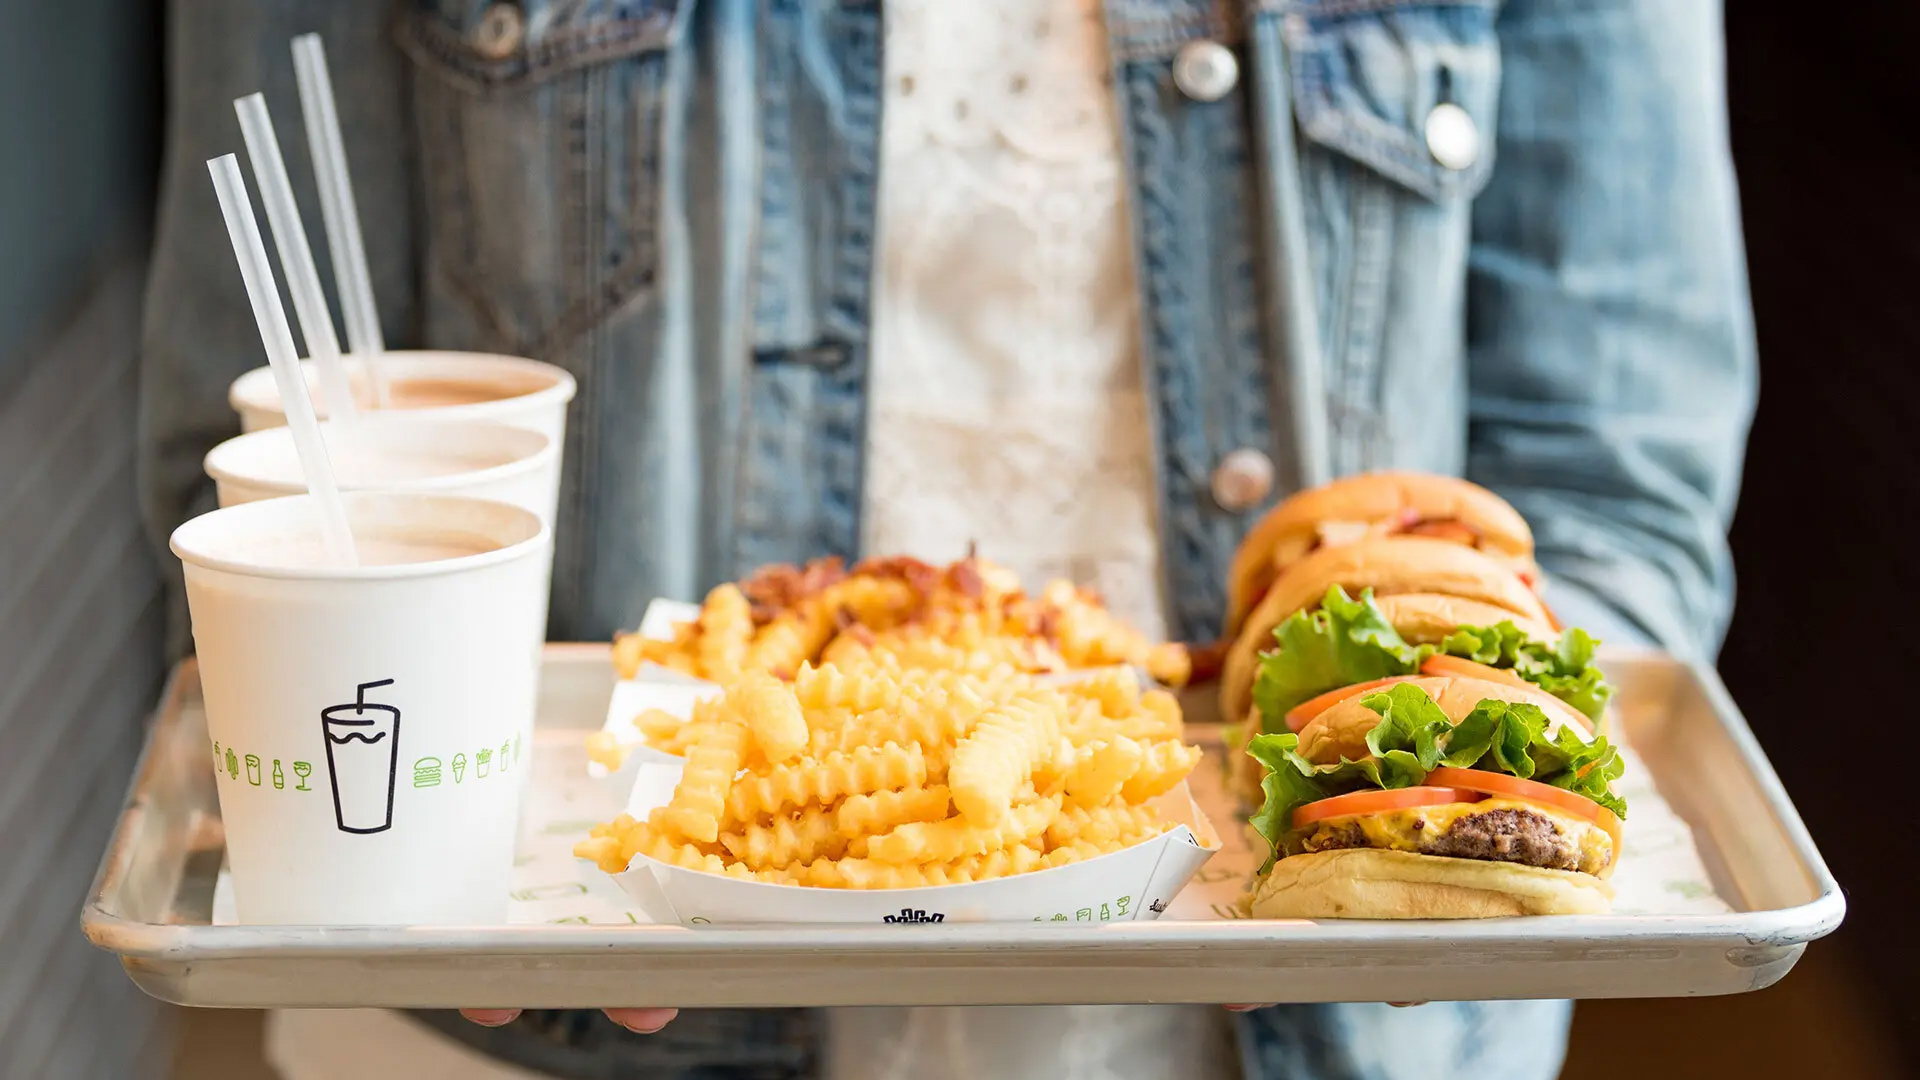 Shake Shack and Chopt are slated to open in the new Union on Knox complex later this year. The restaurants are just some of the additions coming to Greater College Park. Photo courtesy of Shake Shack.